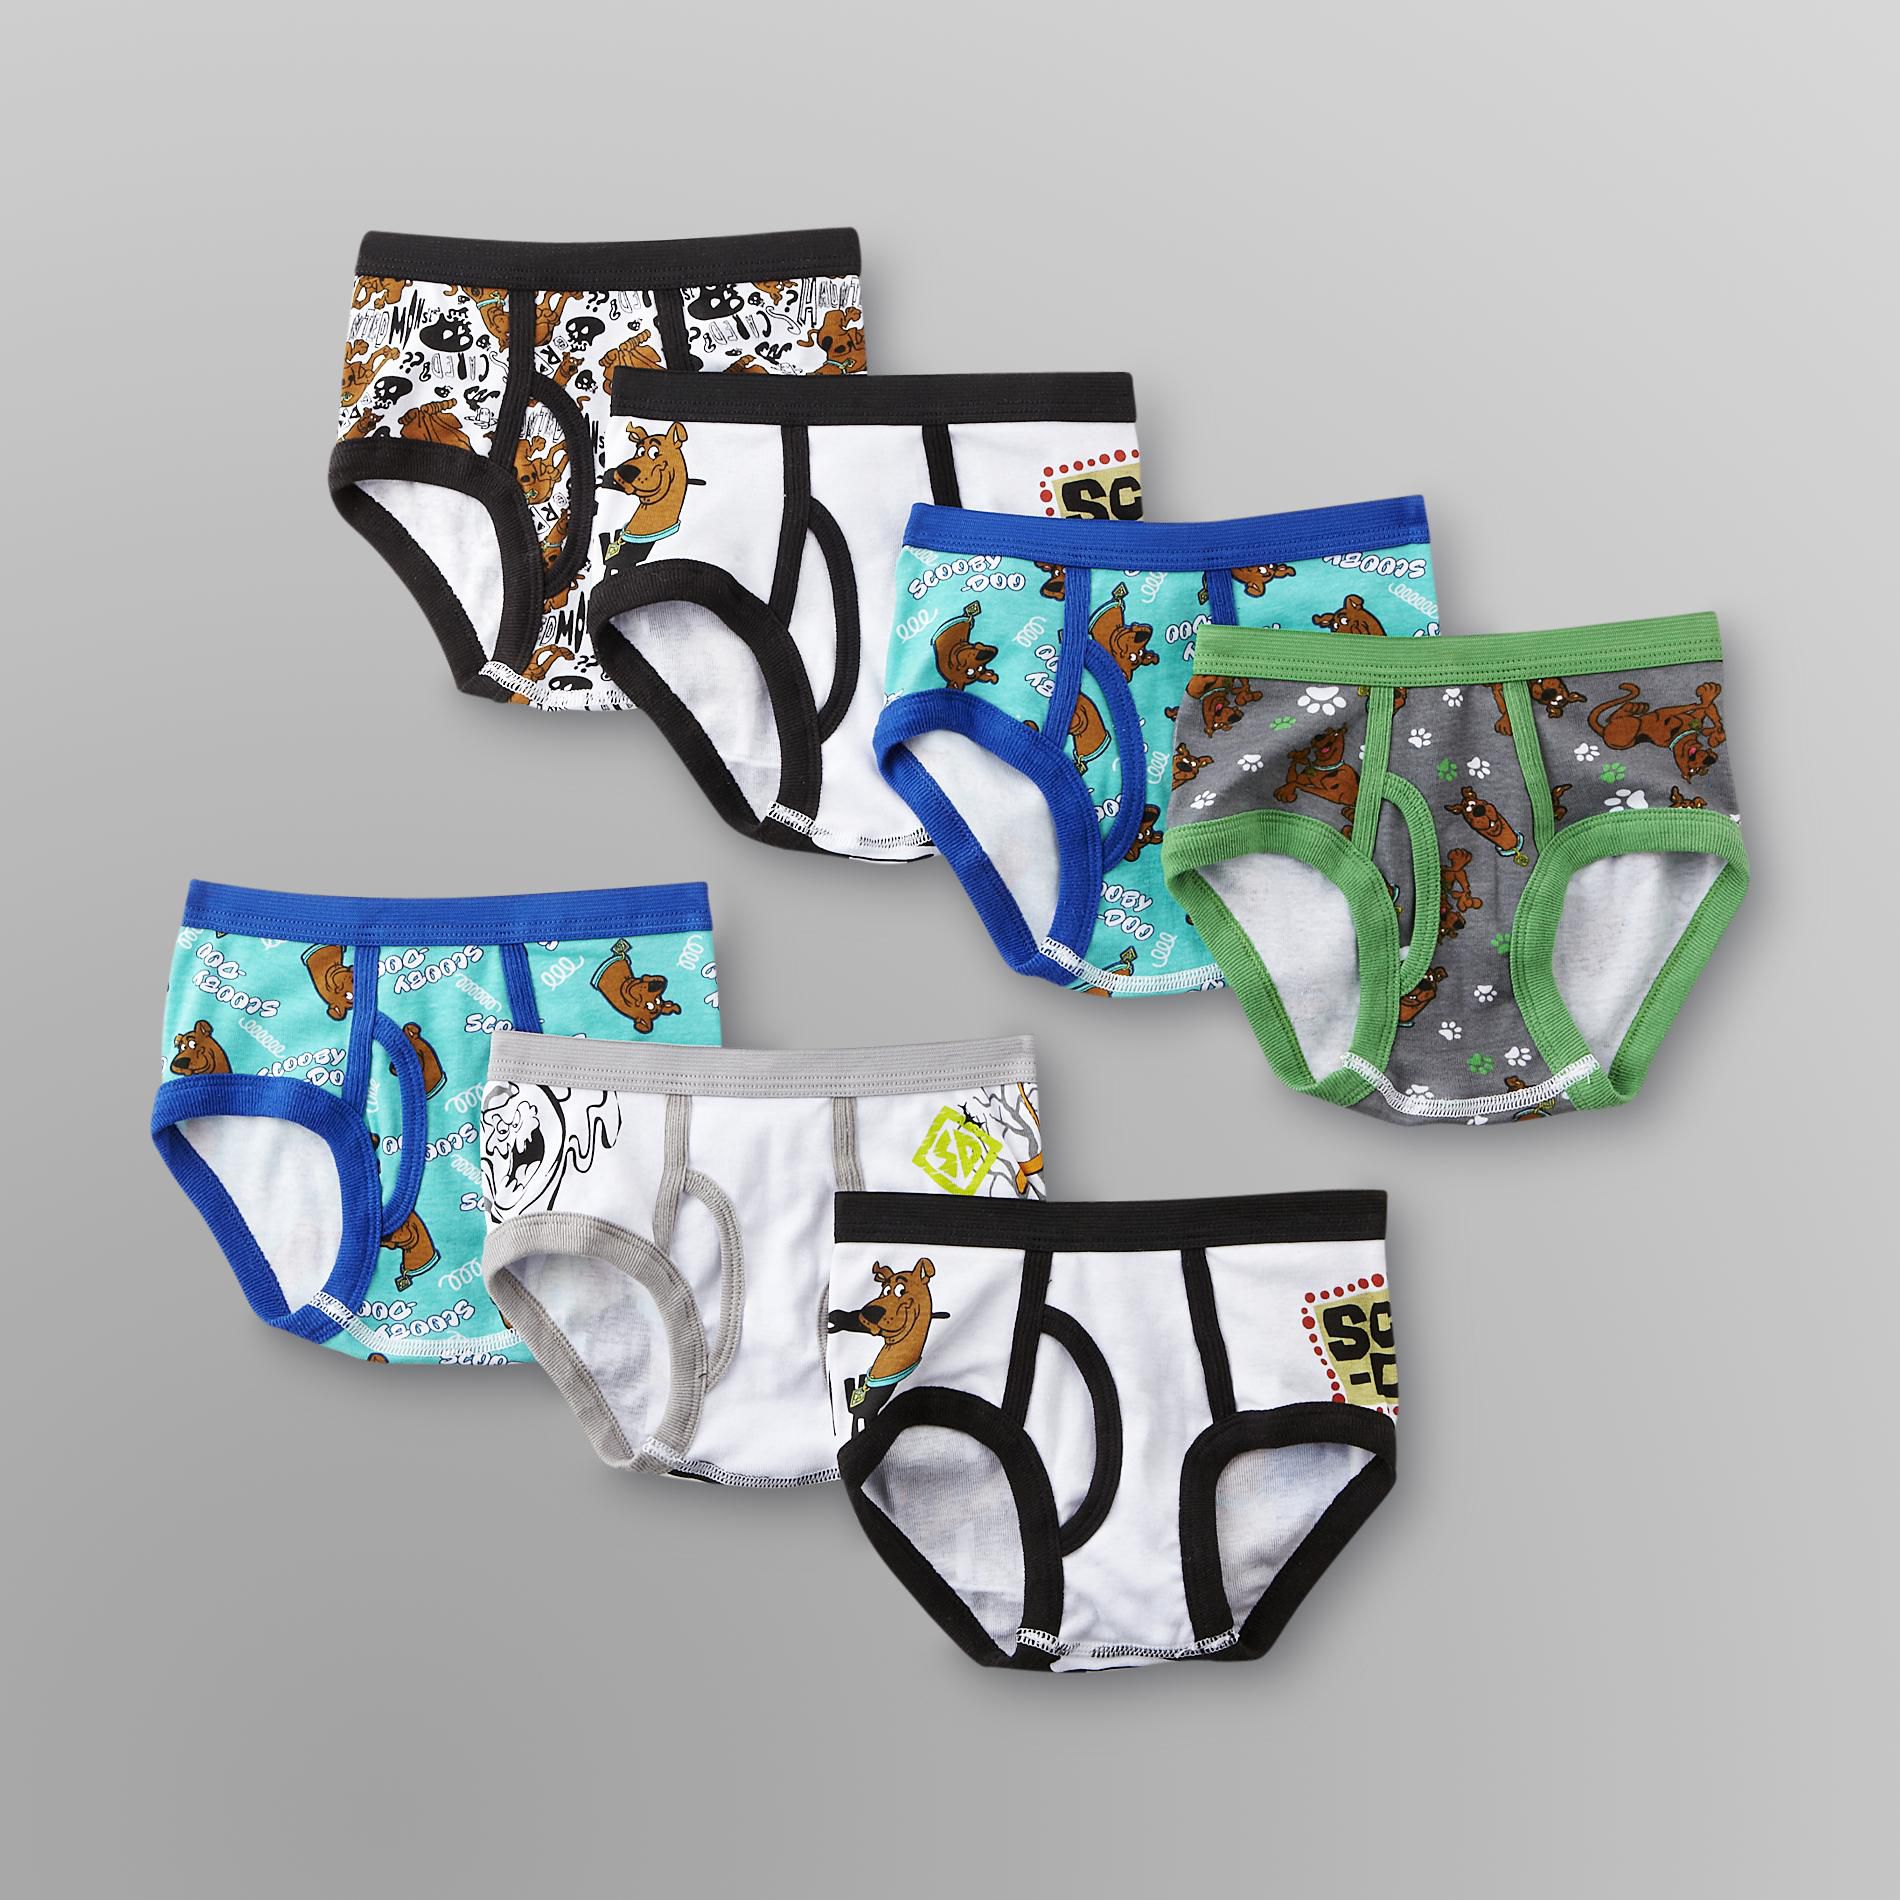 Warner Brothers Toddler Boy's Scooby-Doo Briefs - 5 Pack